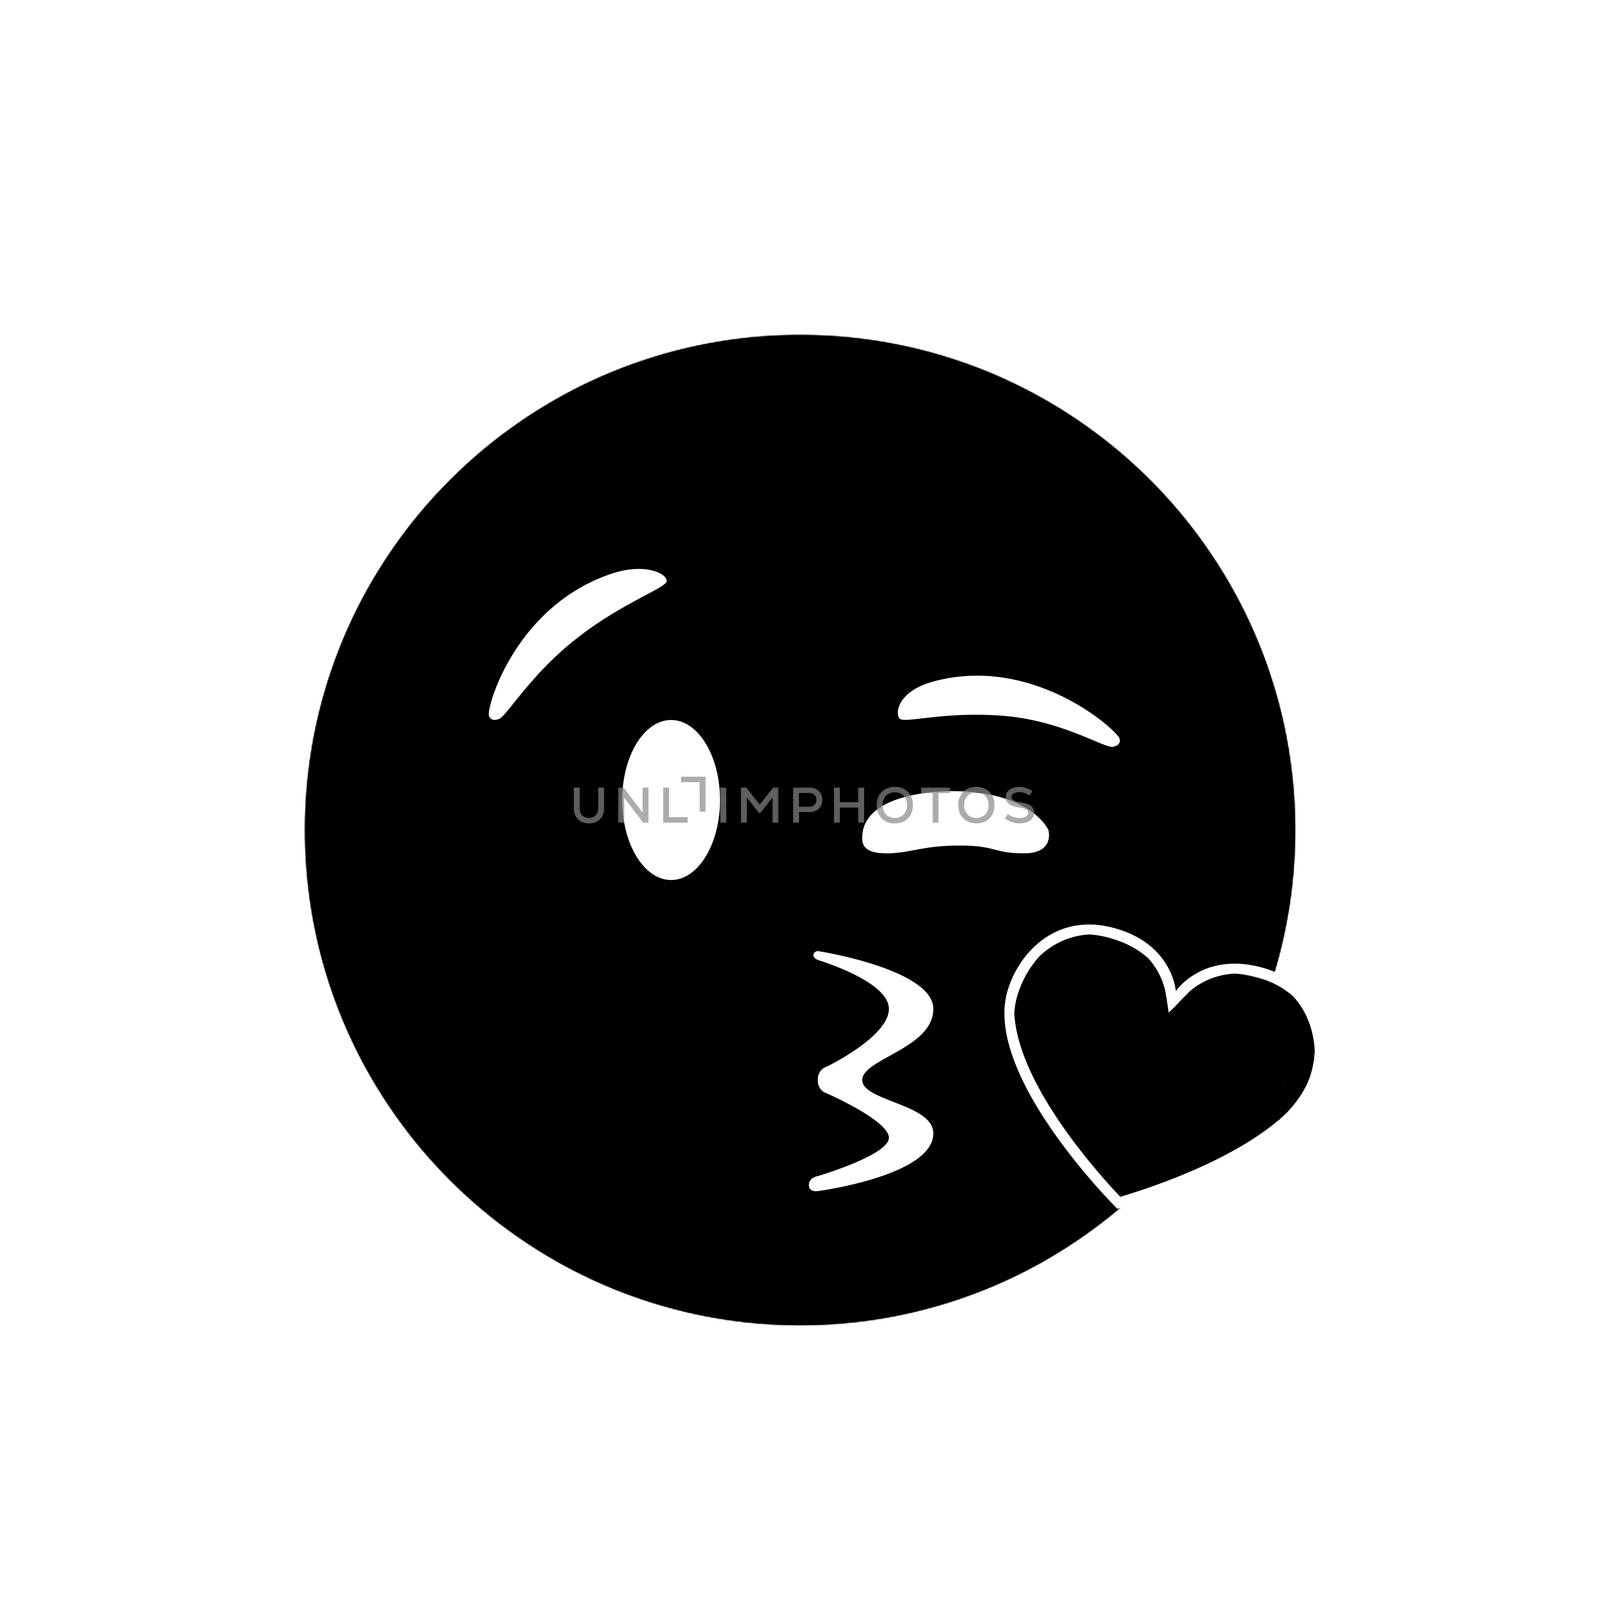 The isolated black smiley face with kissing mouth icon